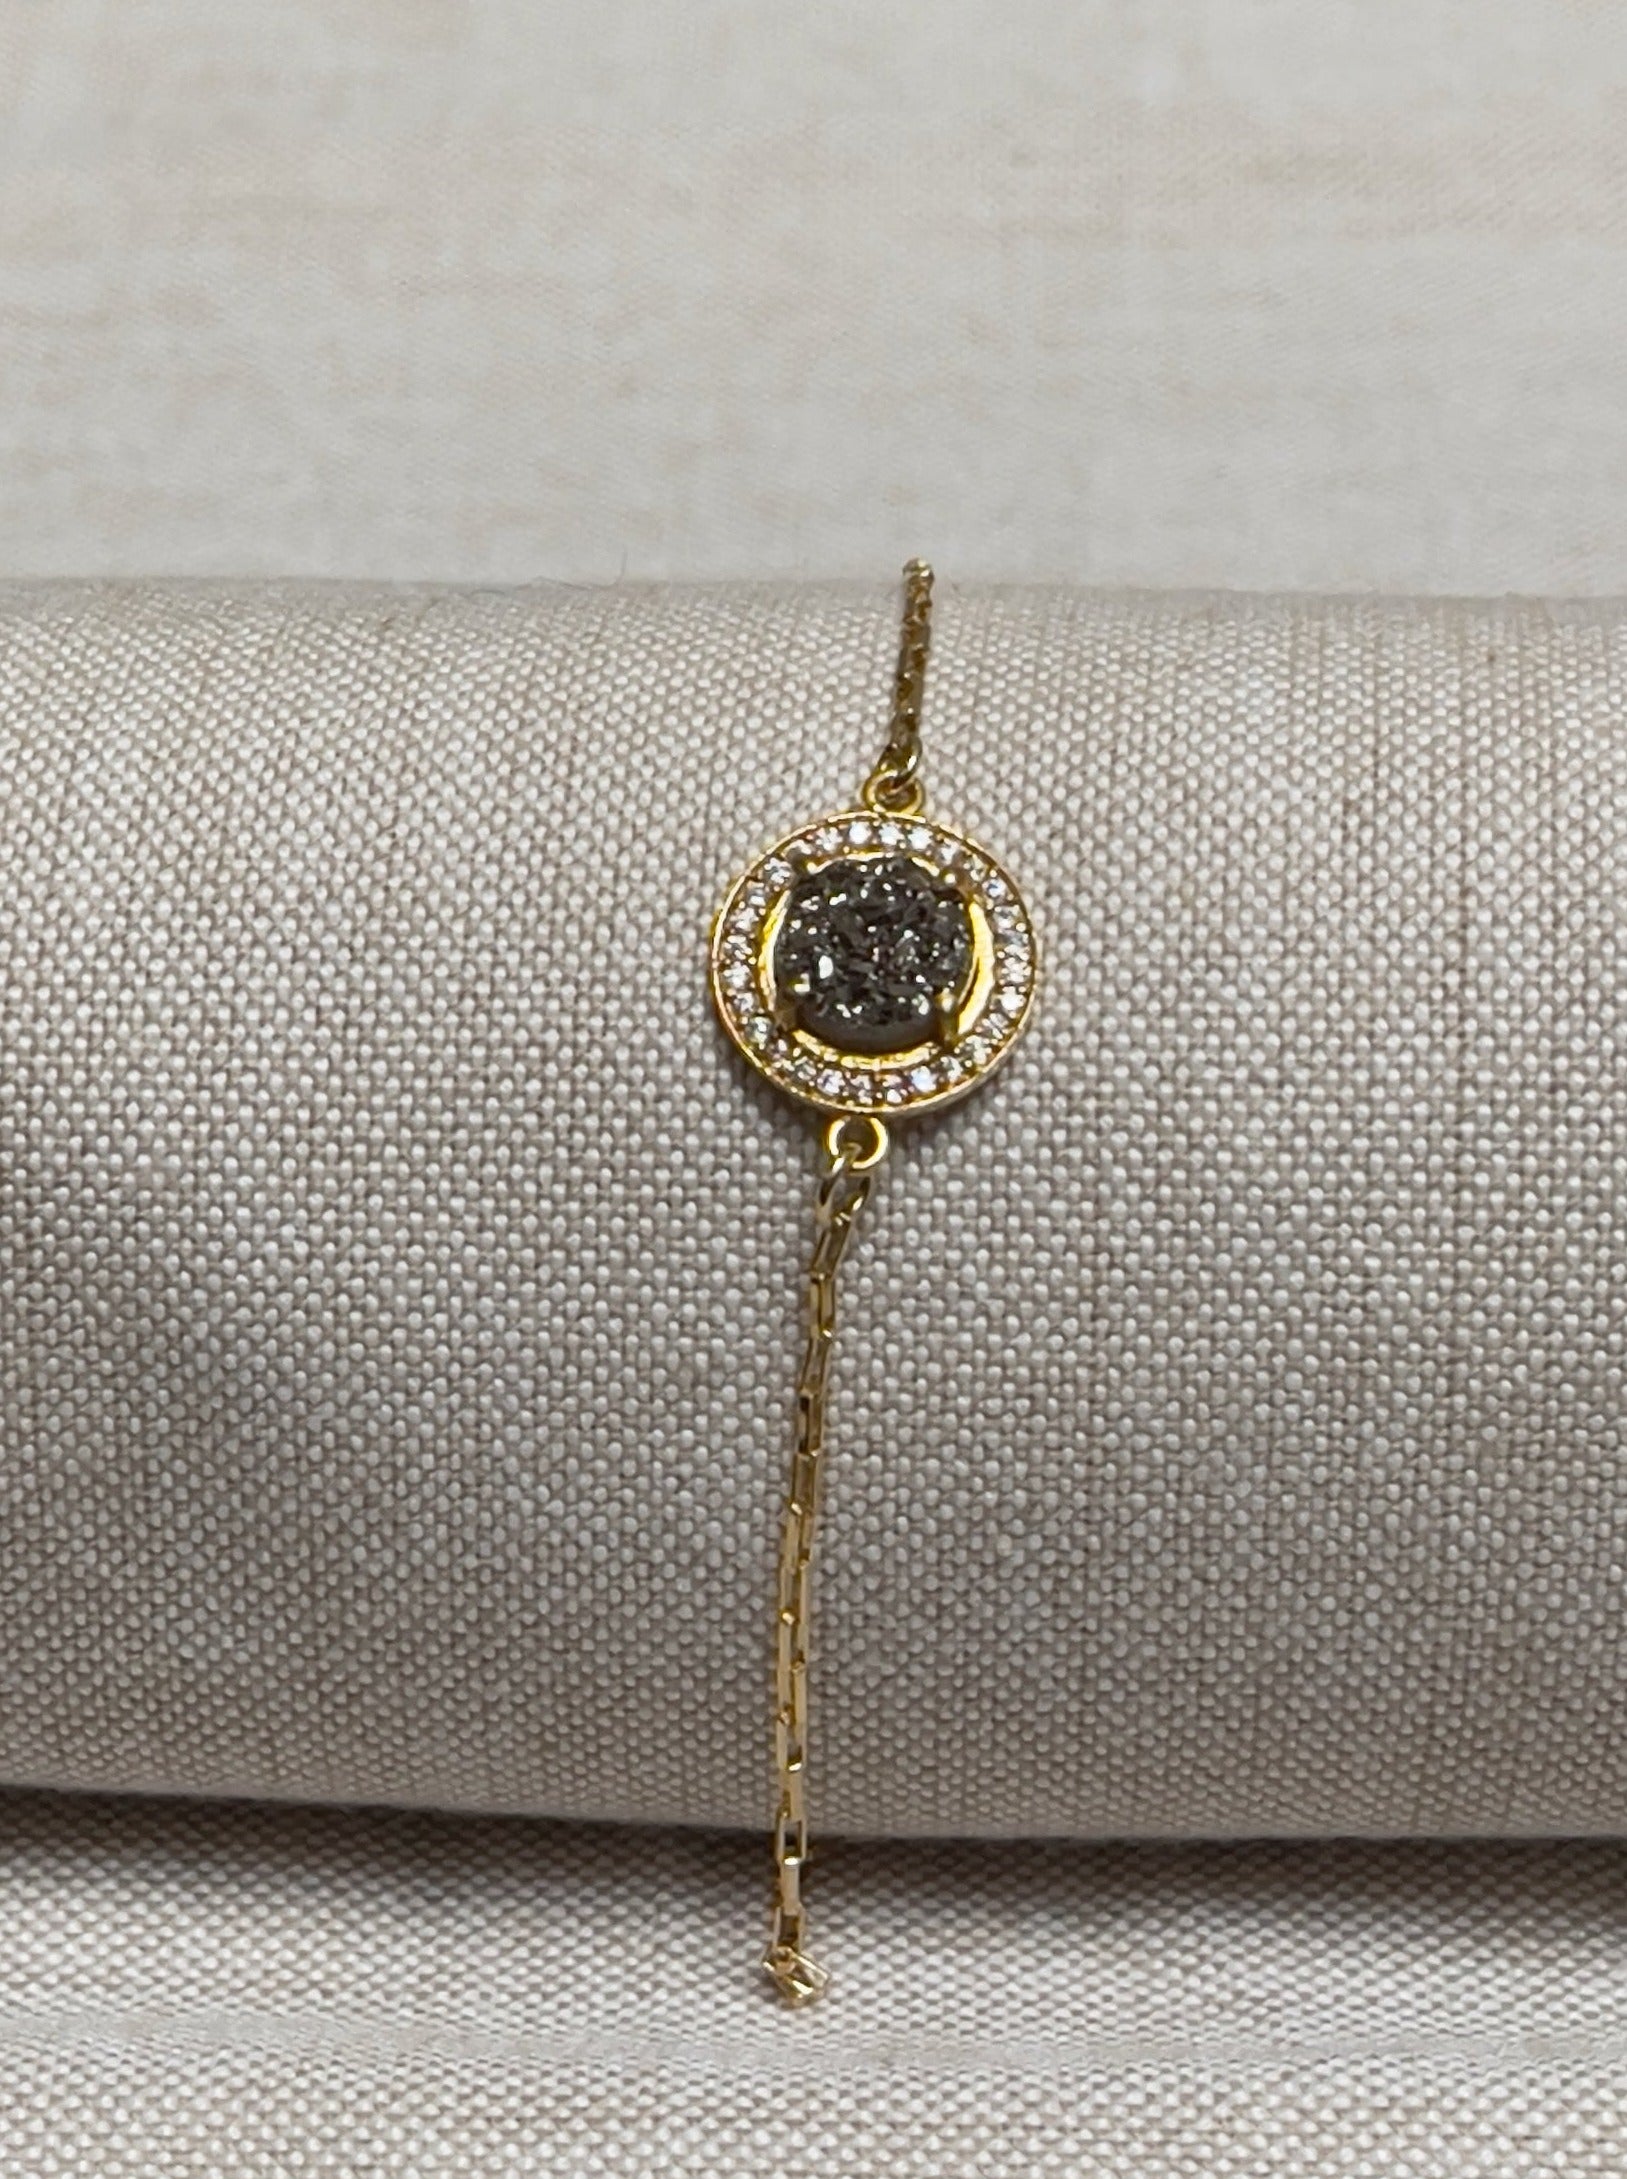 Image of bracelet. Chain Type: Elongated venetian Chain Thickness: 1.2 mm Clasp: Lobster Chain: 12k Gold-filled Charm: Gray druzy made of gold vermeil with CZ micro-pave